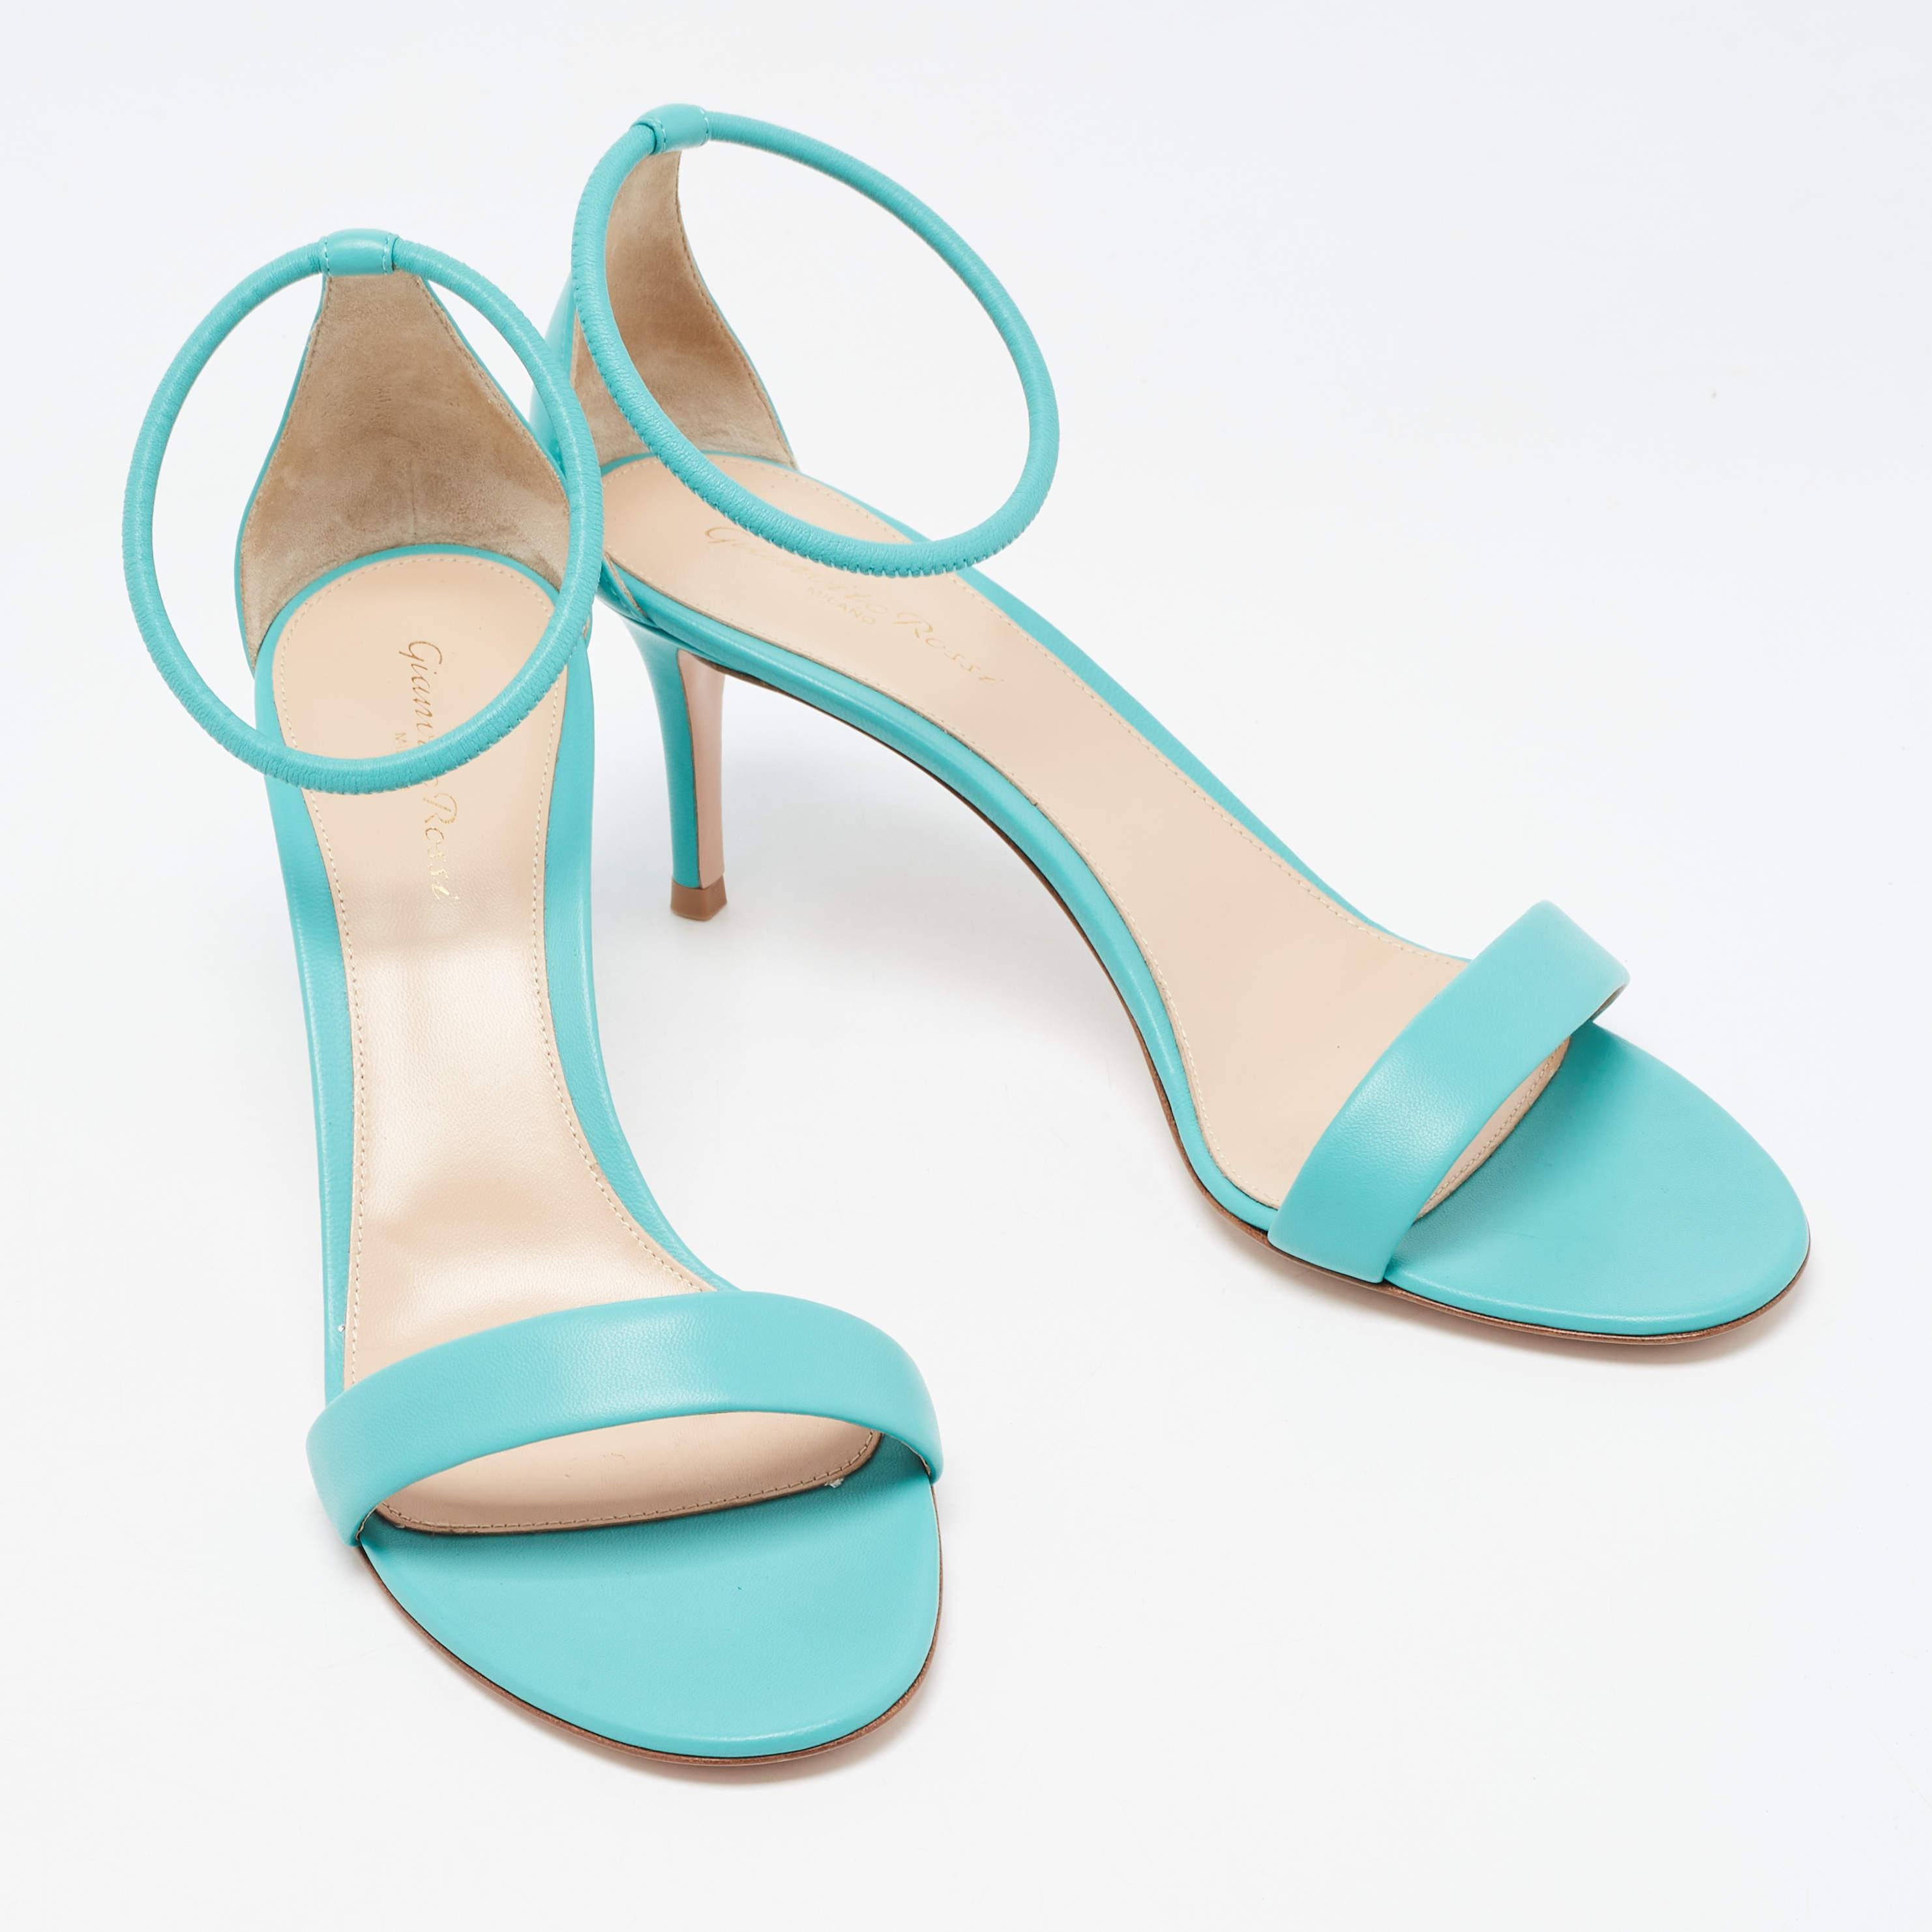 Gianvito Rossi Blue Leather Ankle Strap Sandals Size 39.5 1